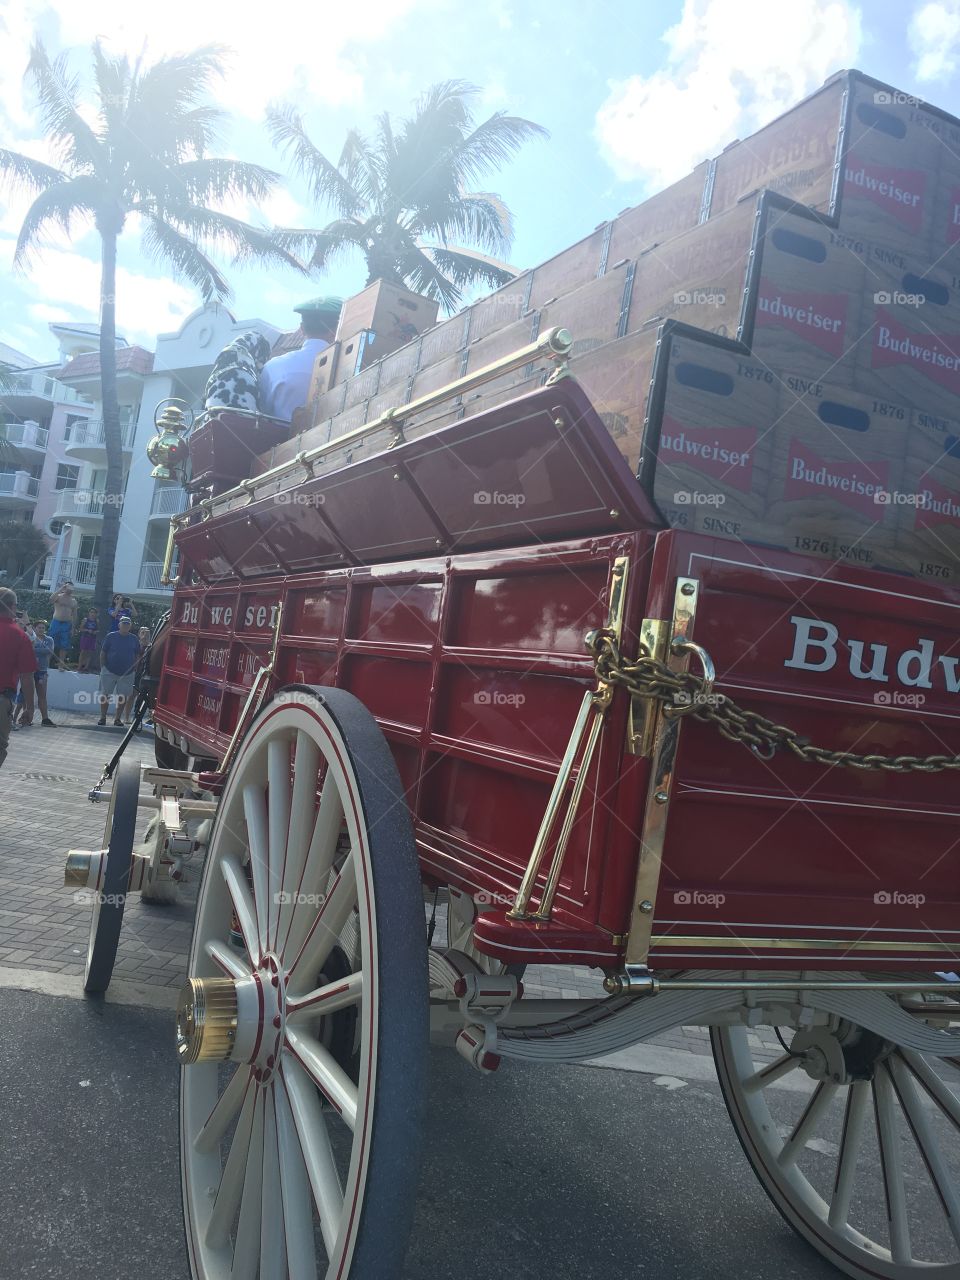 Budweiser wagon Clydesdale parade